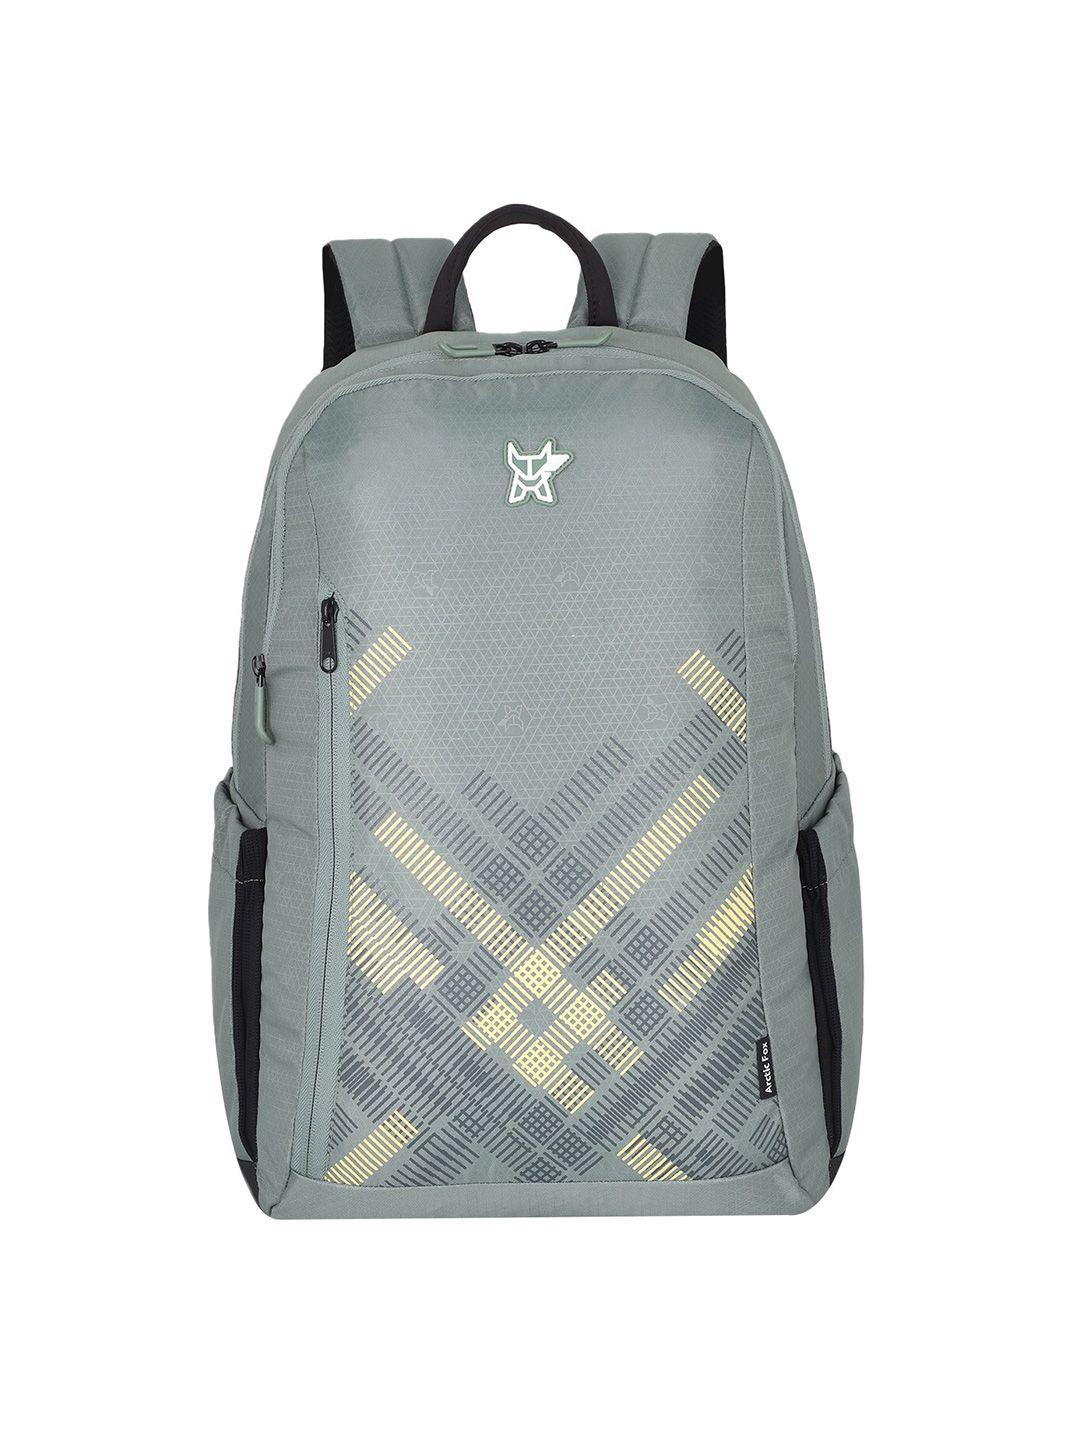 arctic fox criss-cross printed padded laptop backpack